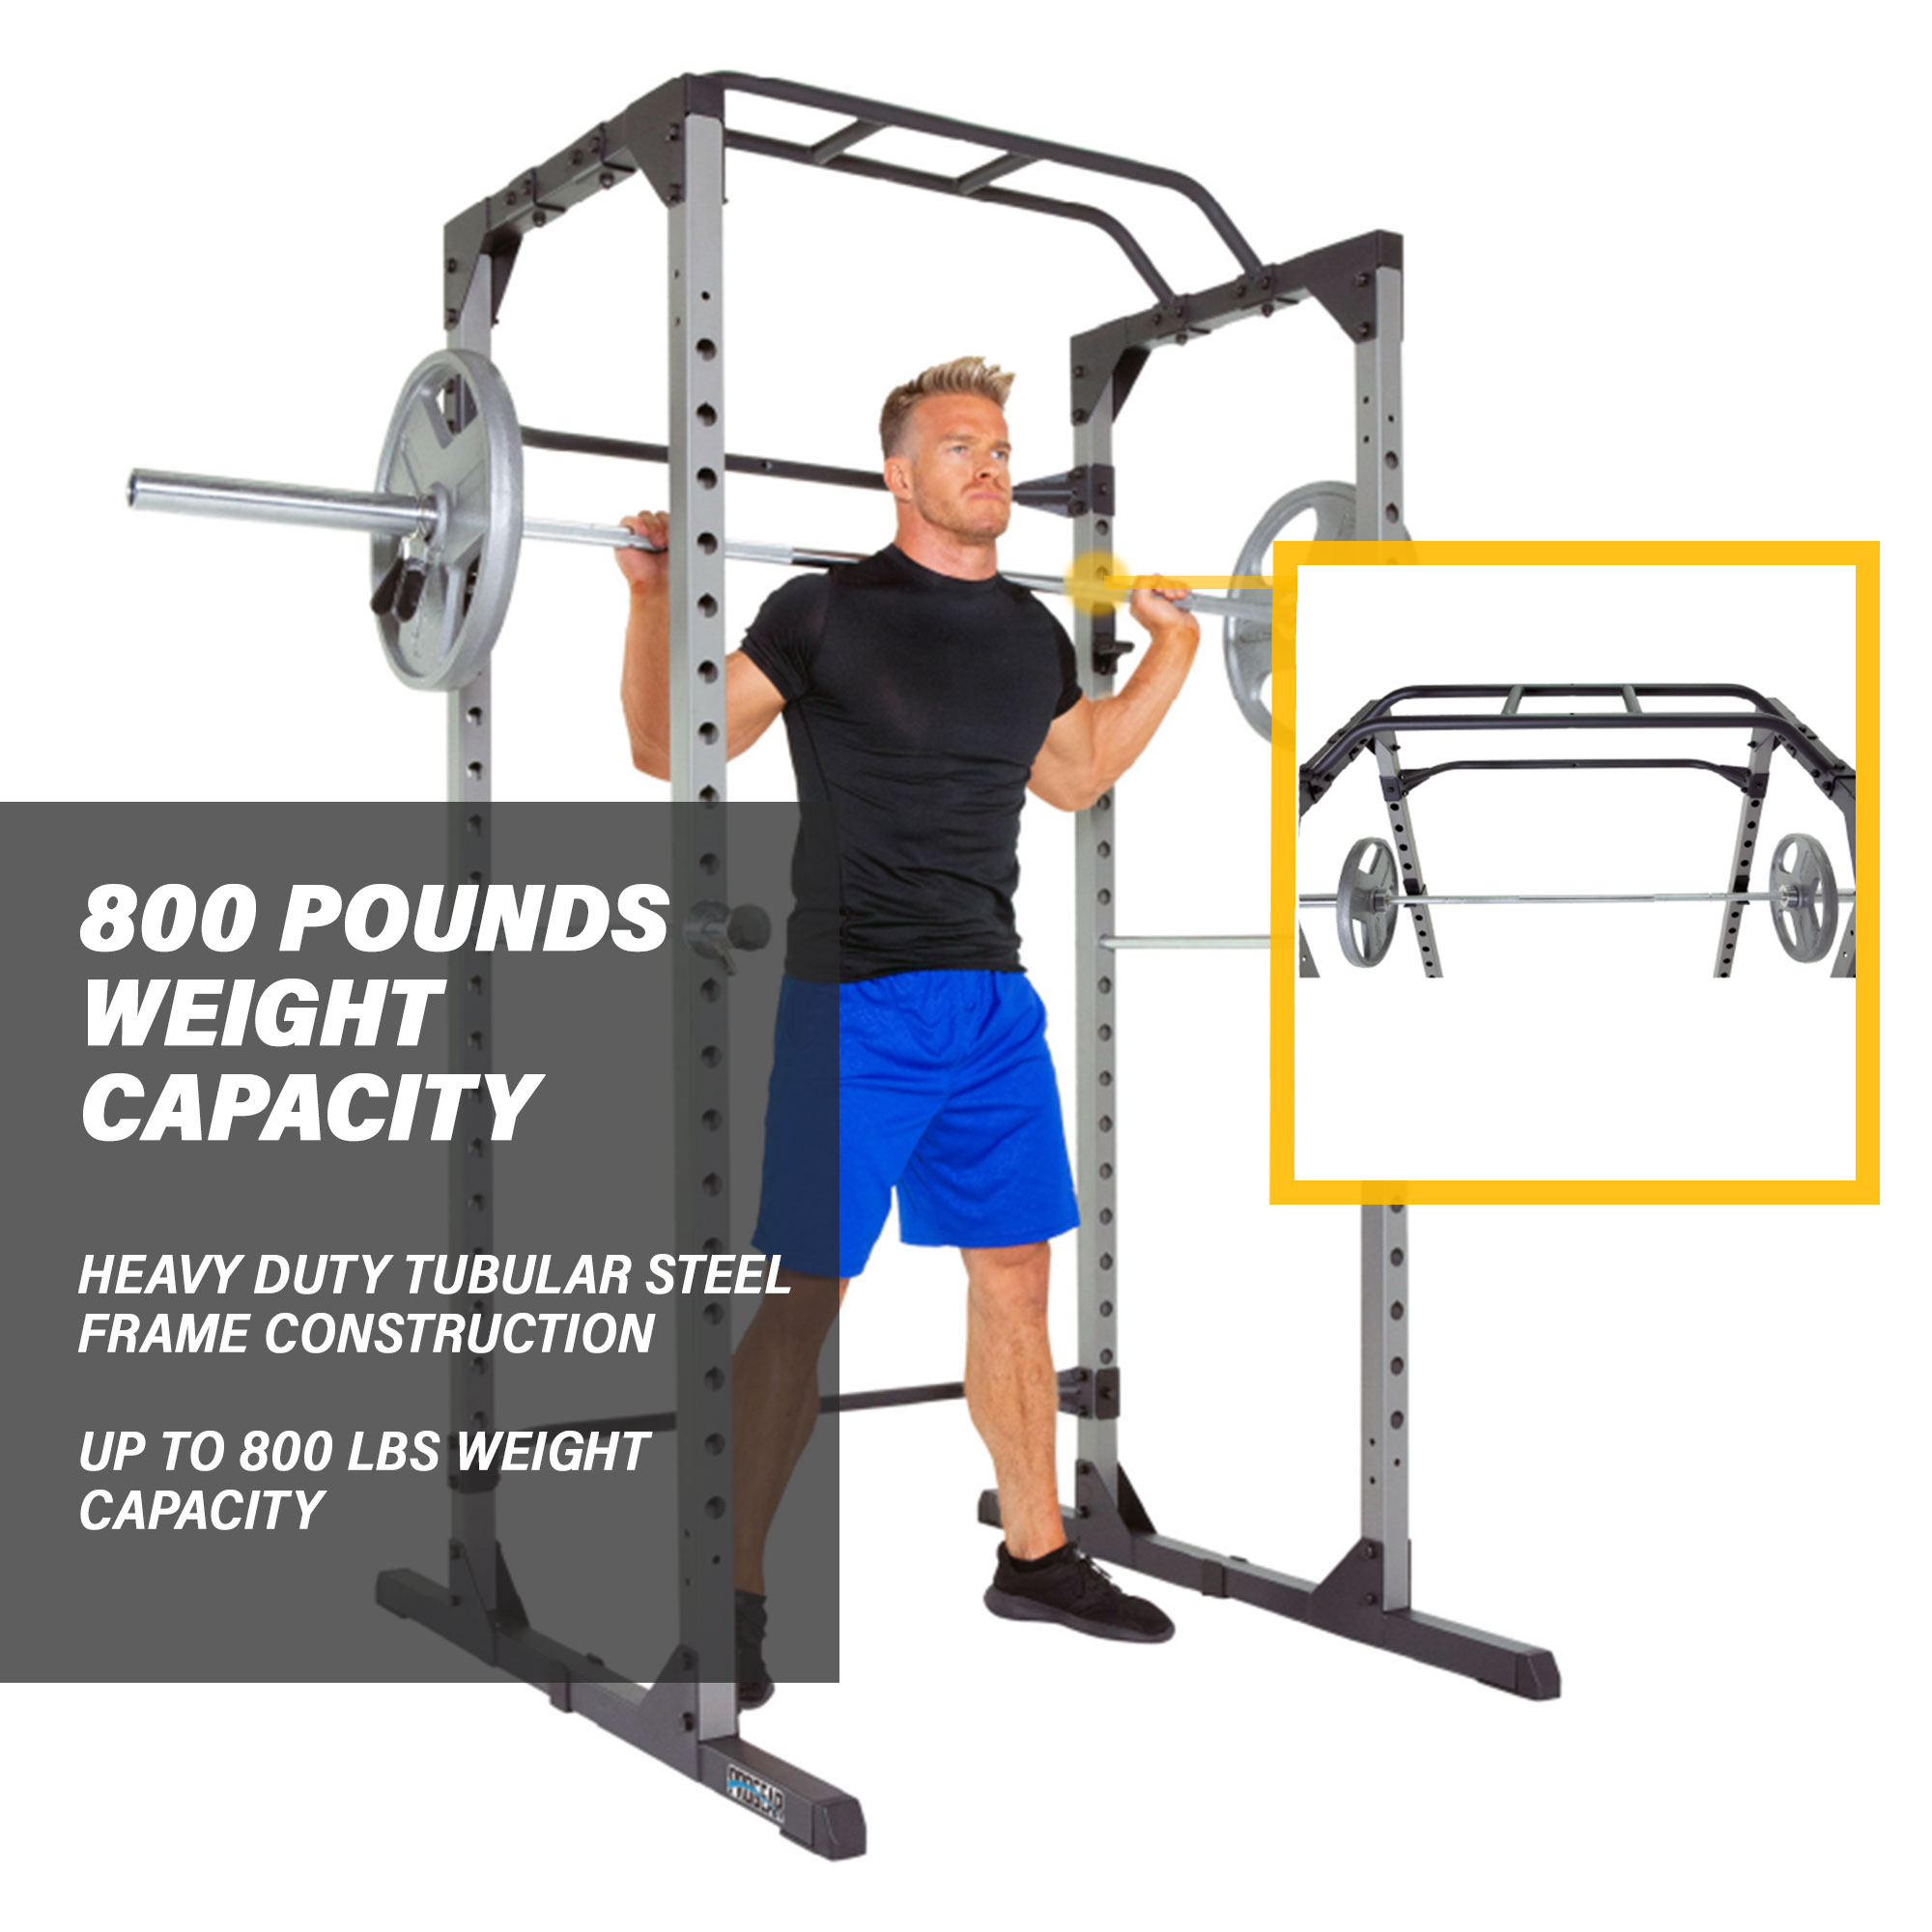 ProGear Squat Rack Power Cage with J-Hooks, Ultra Strength 800lb Weight Capacity, Optional Lat Pulldown Attachment - image 4 of 6